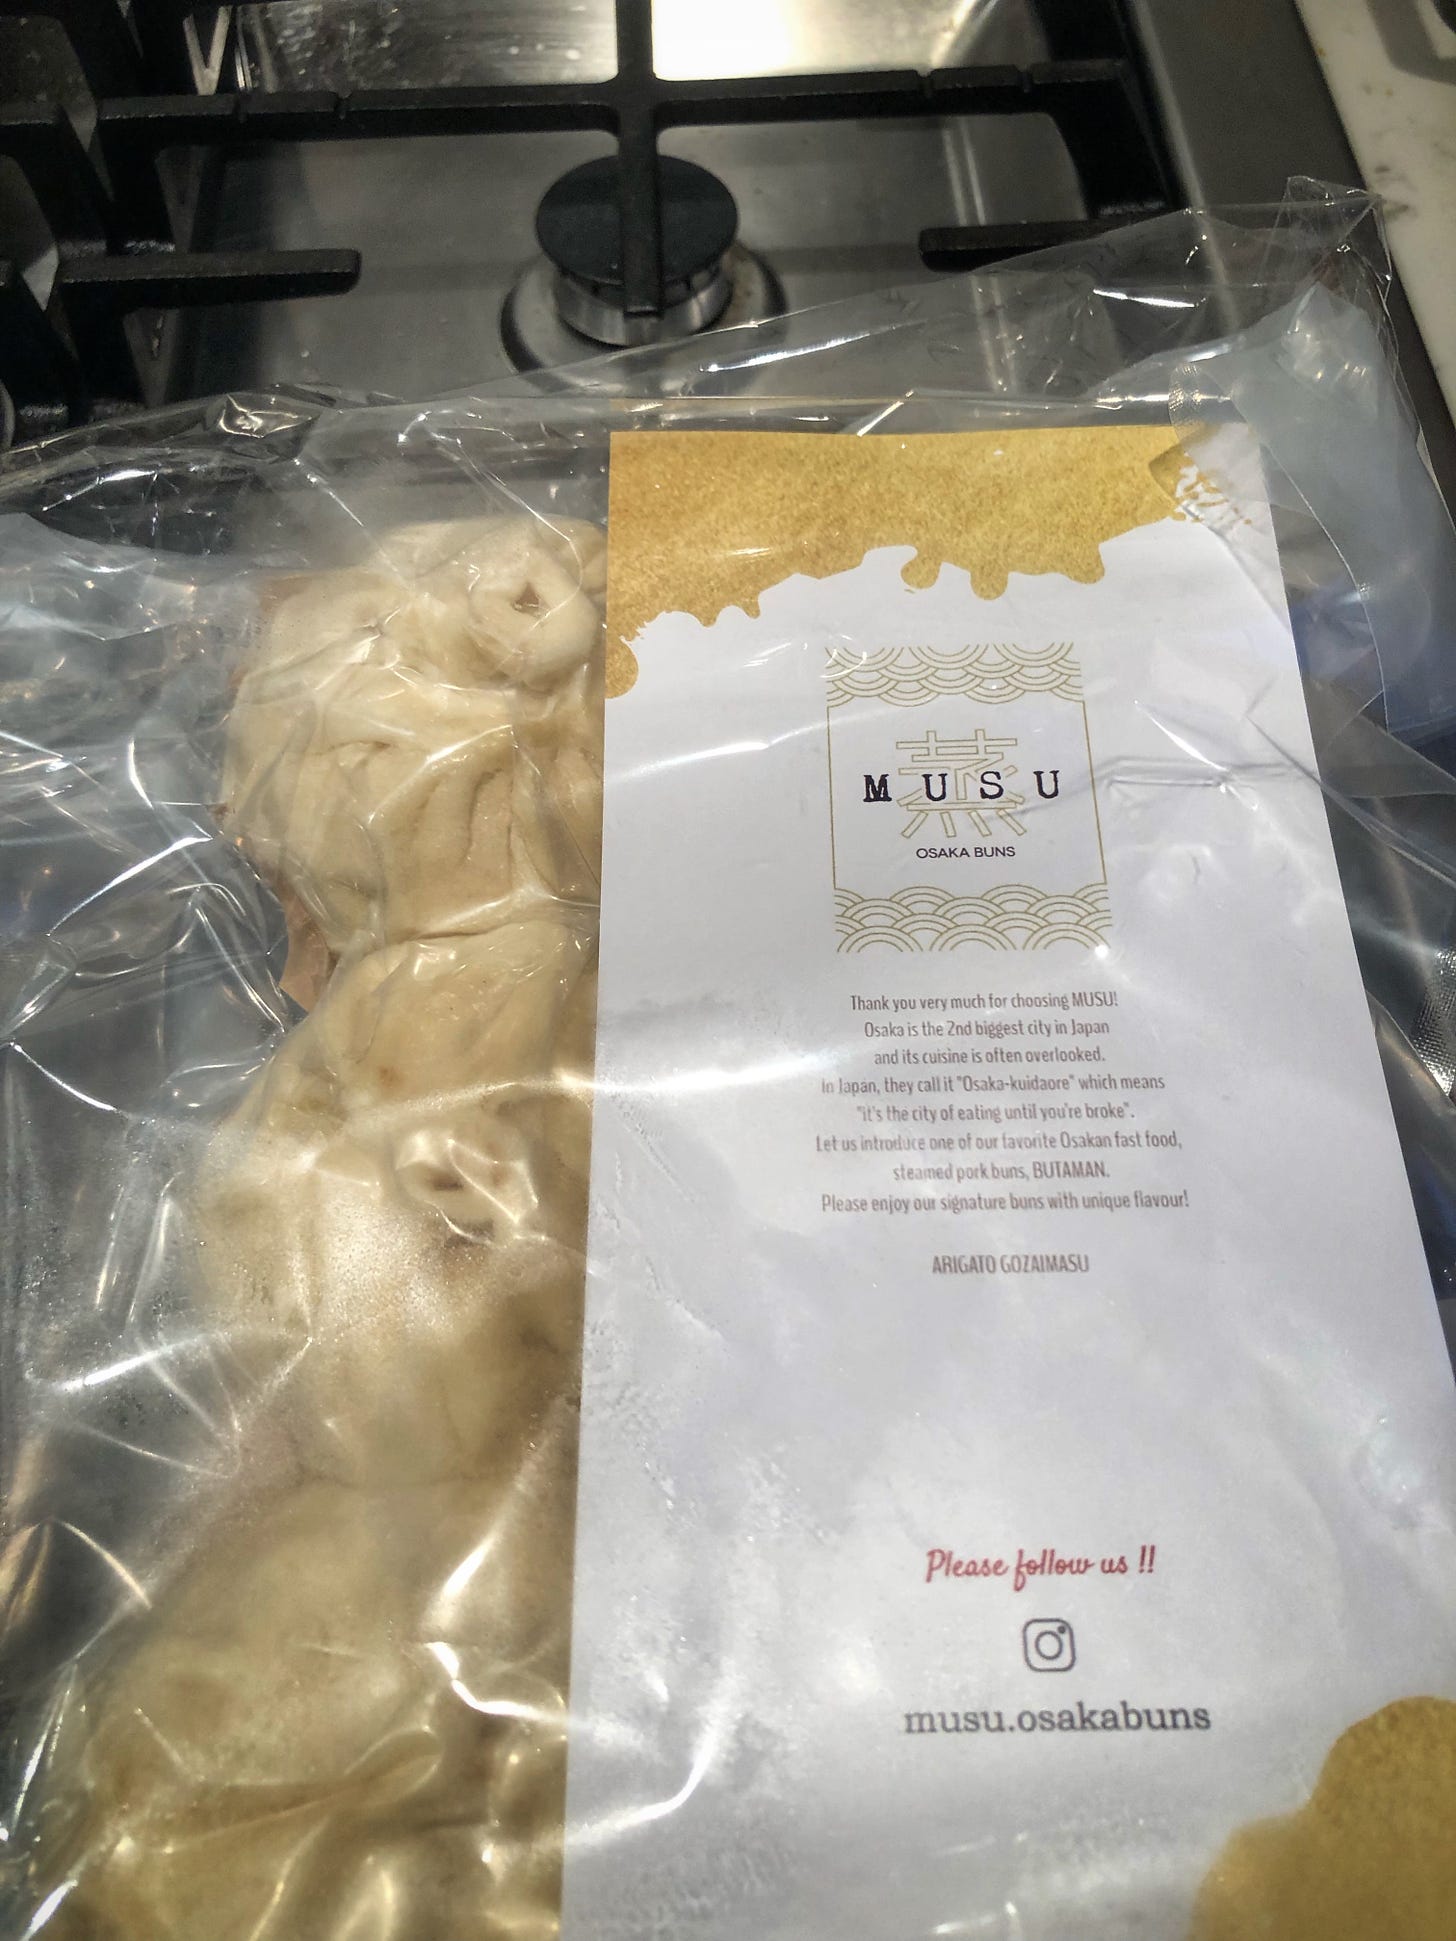 A package of 6 frozen pork buns in a package that reads "Musu Osaka Buns"